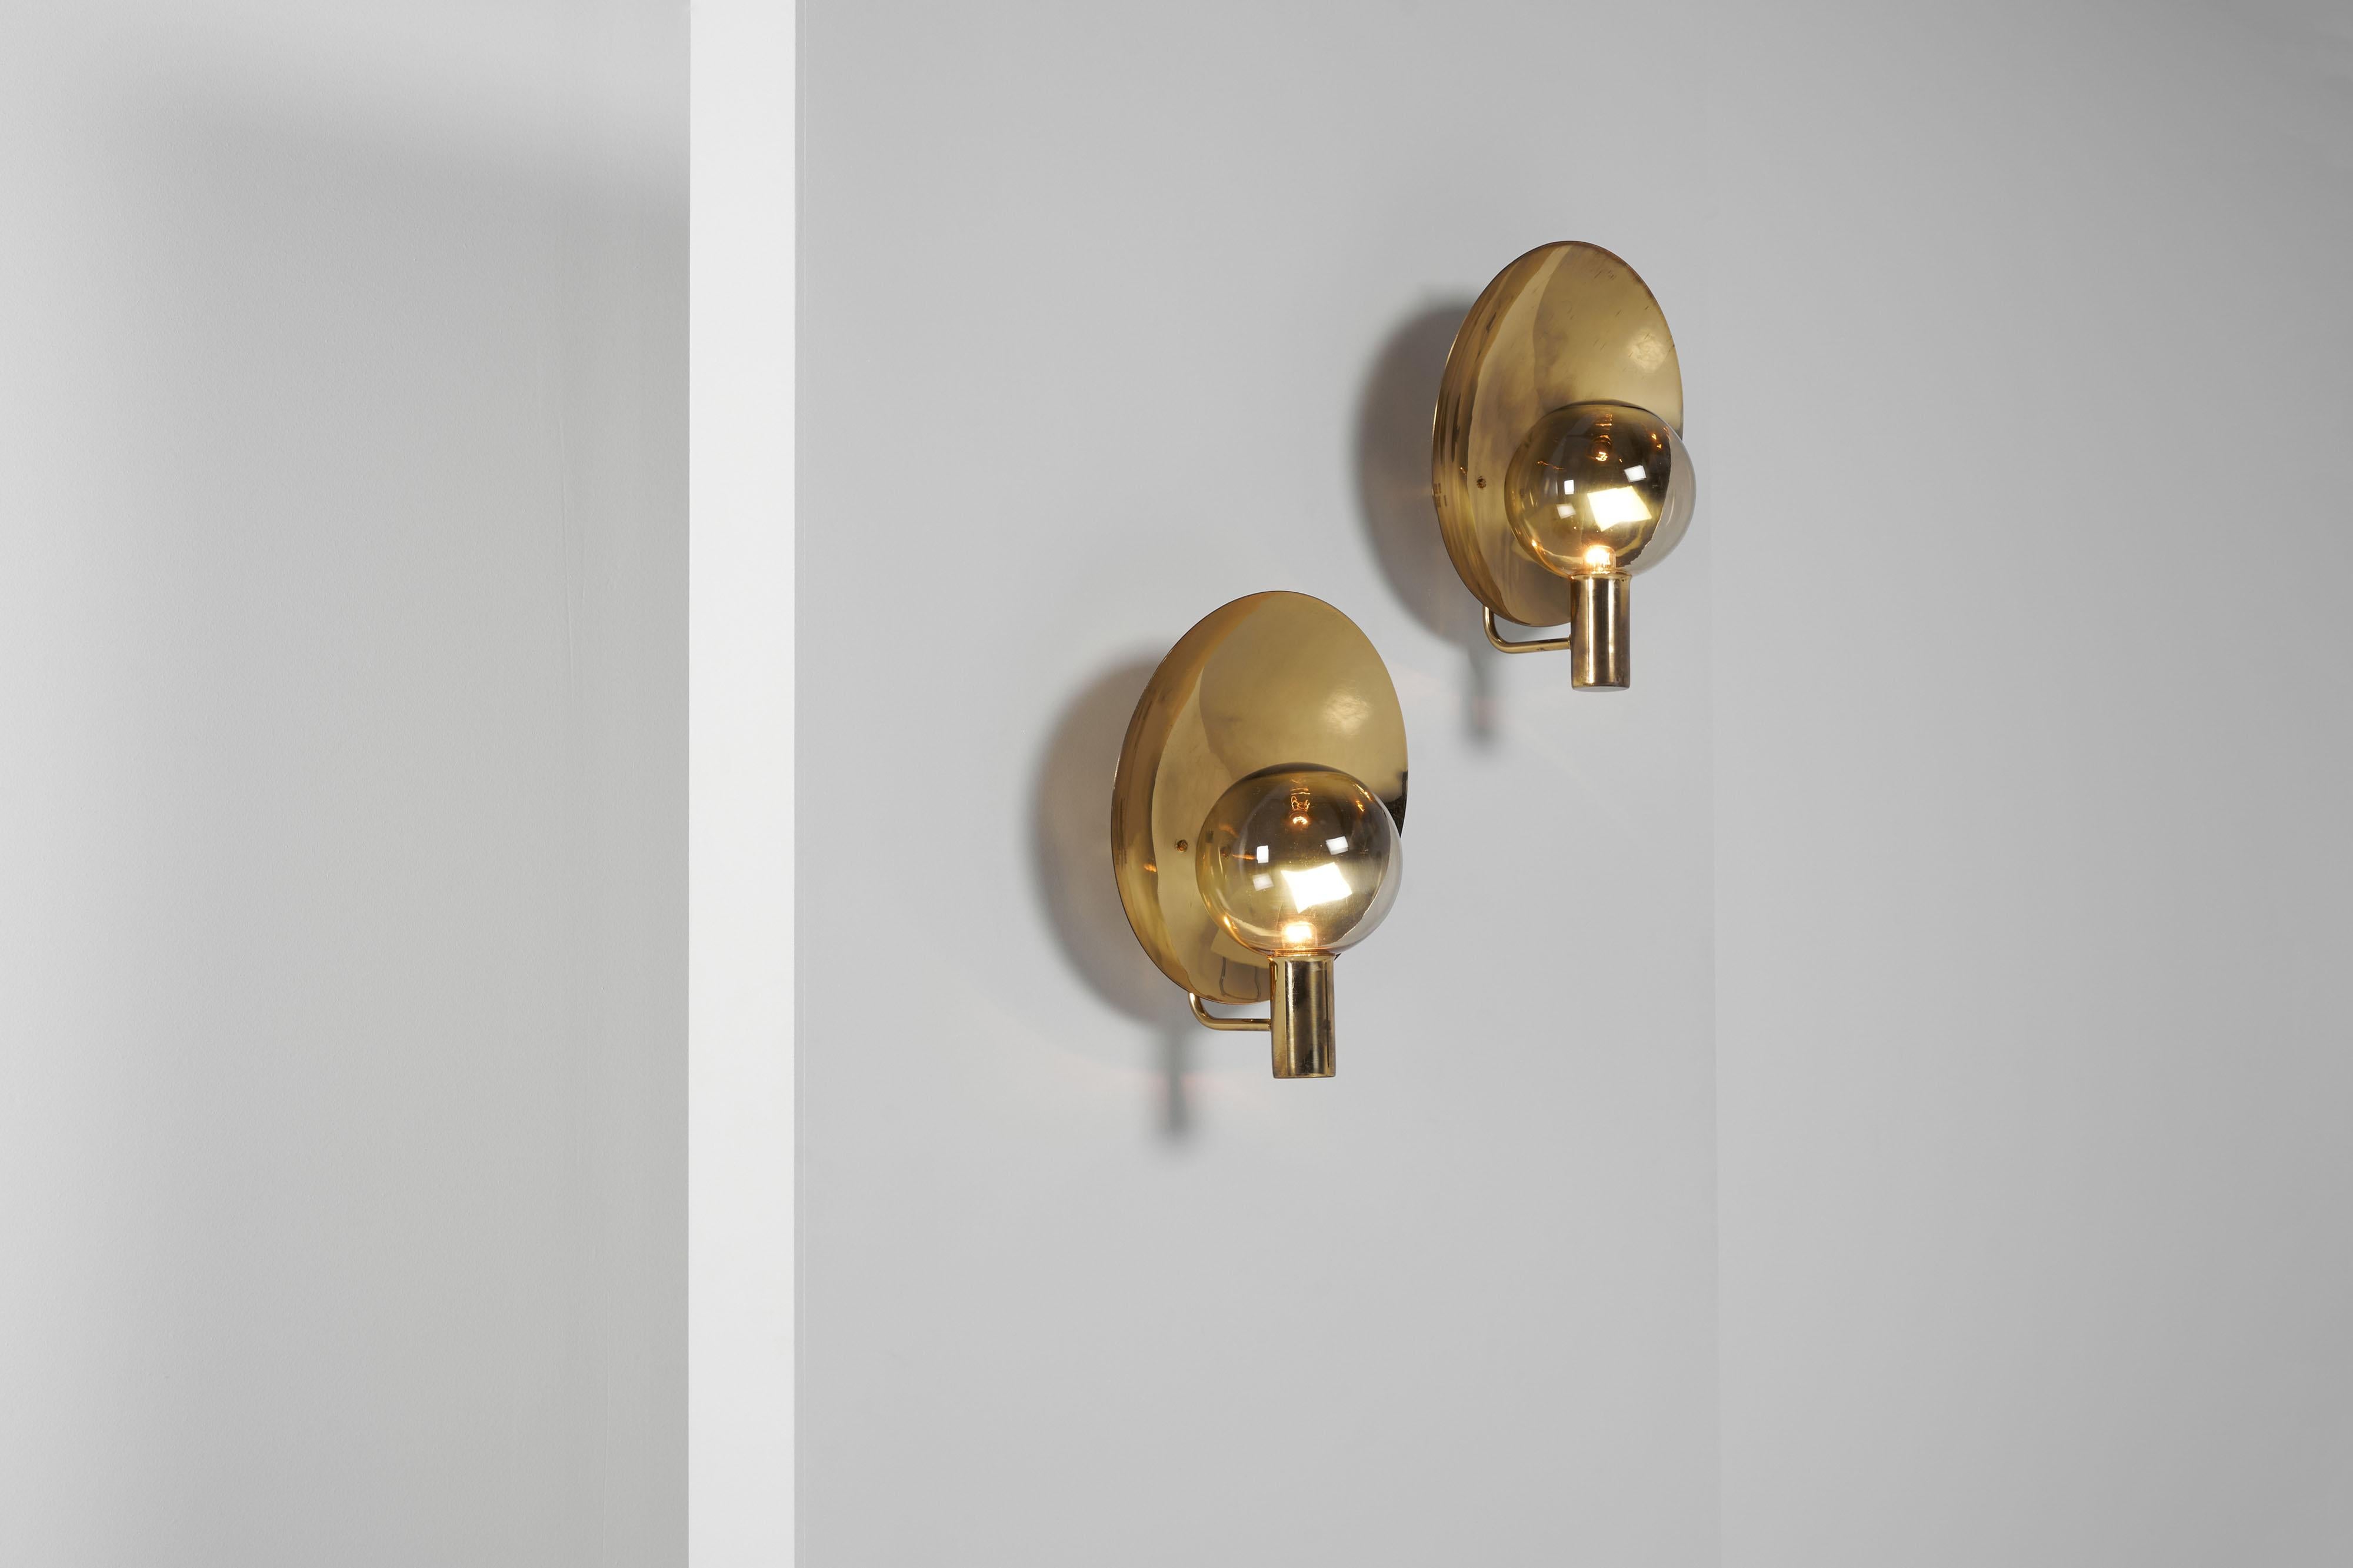 Highly decorative pair of models V-180 sconces designed by Hans Agne Jakobsson (1919-2009) and manufactured by his own company Hans Agne Jakobsson AB in Markaryd, weden 1959. These well executed wall lamps were designed in the golden age of